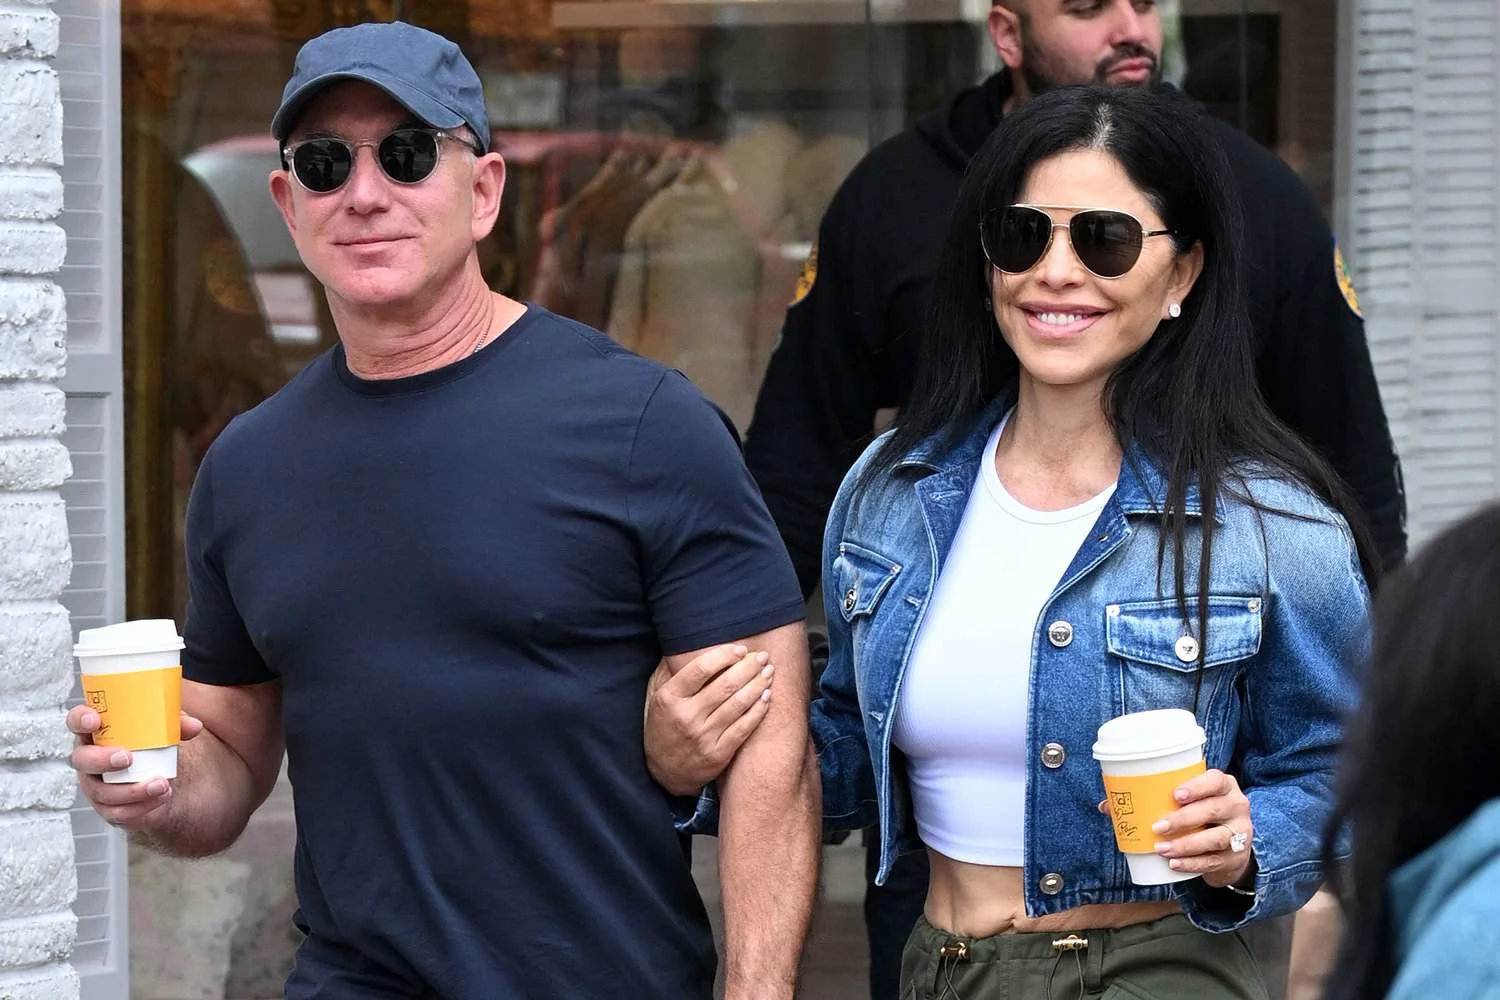 Jeff Bezos and Lauren Sánchez All Smiles as They Walk Arm-in-Arm After Moving to South Florida